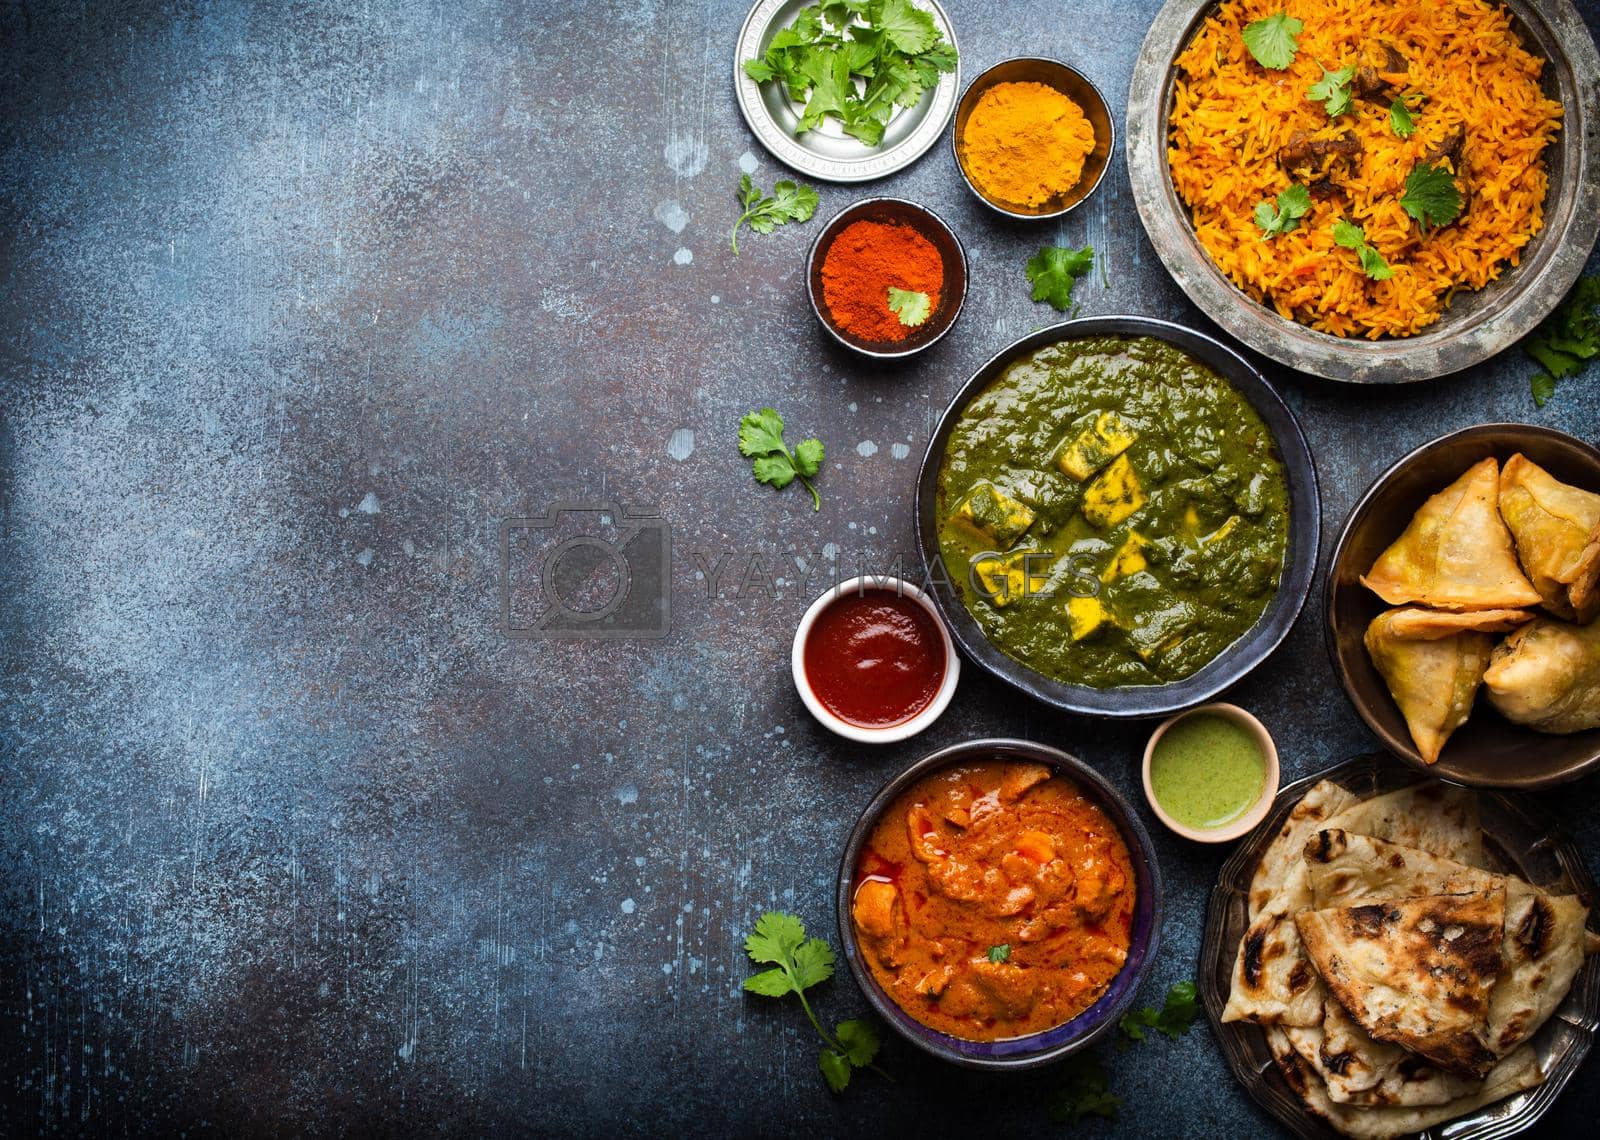 Royalty free image of Authentic Indian dishes and snacks by its_al_dente